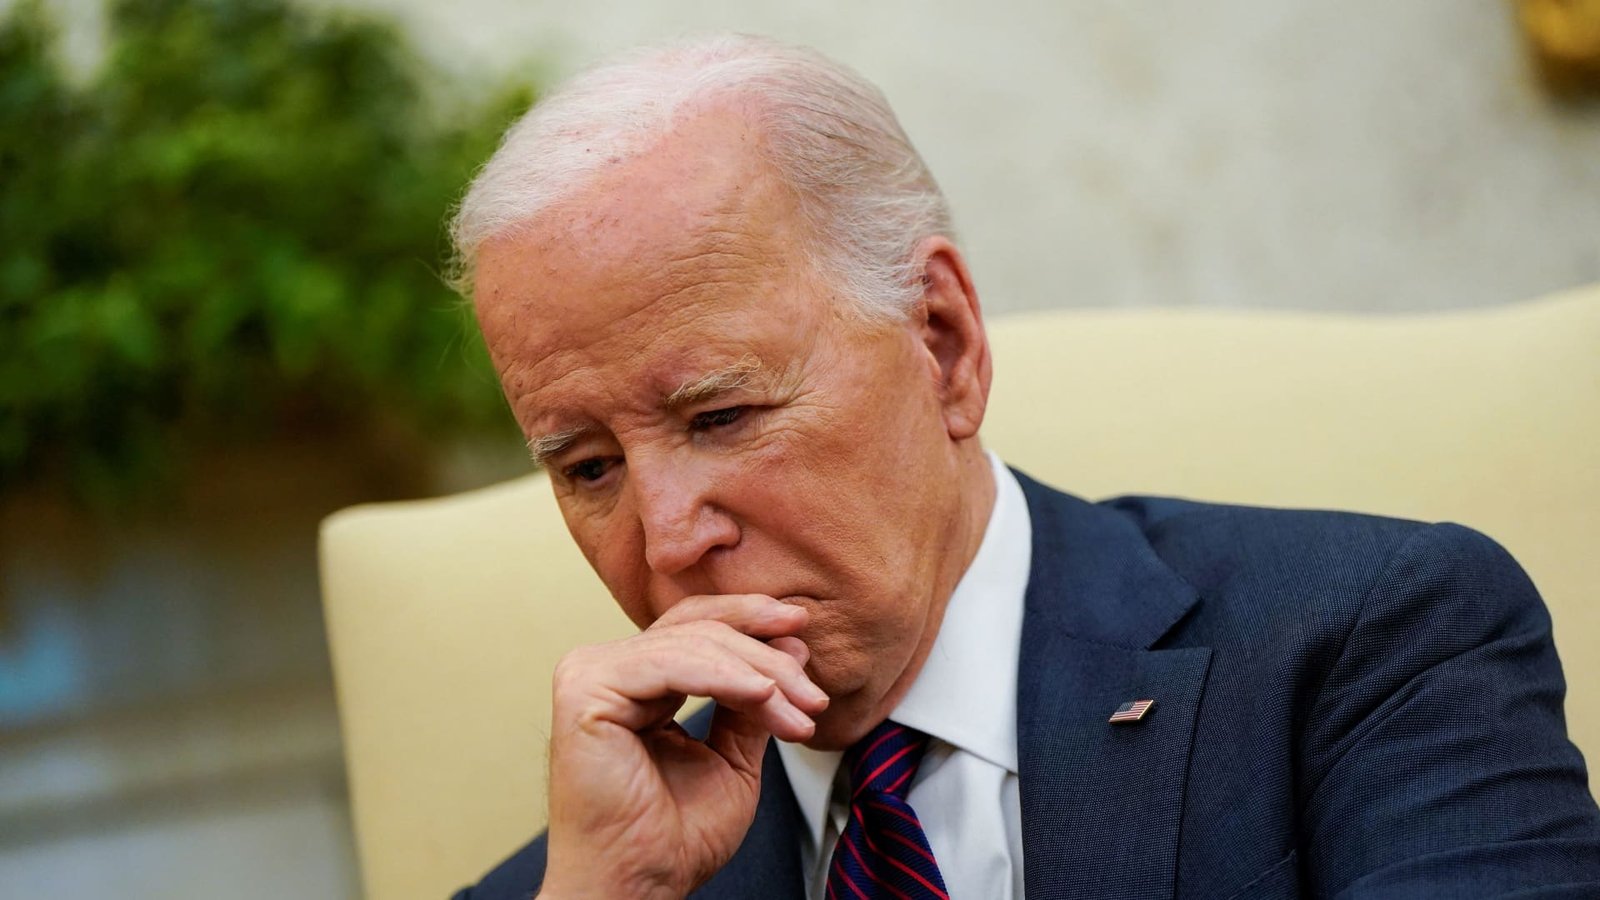 Biden tells ally he is weighing whether or not to remain in race: Studies